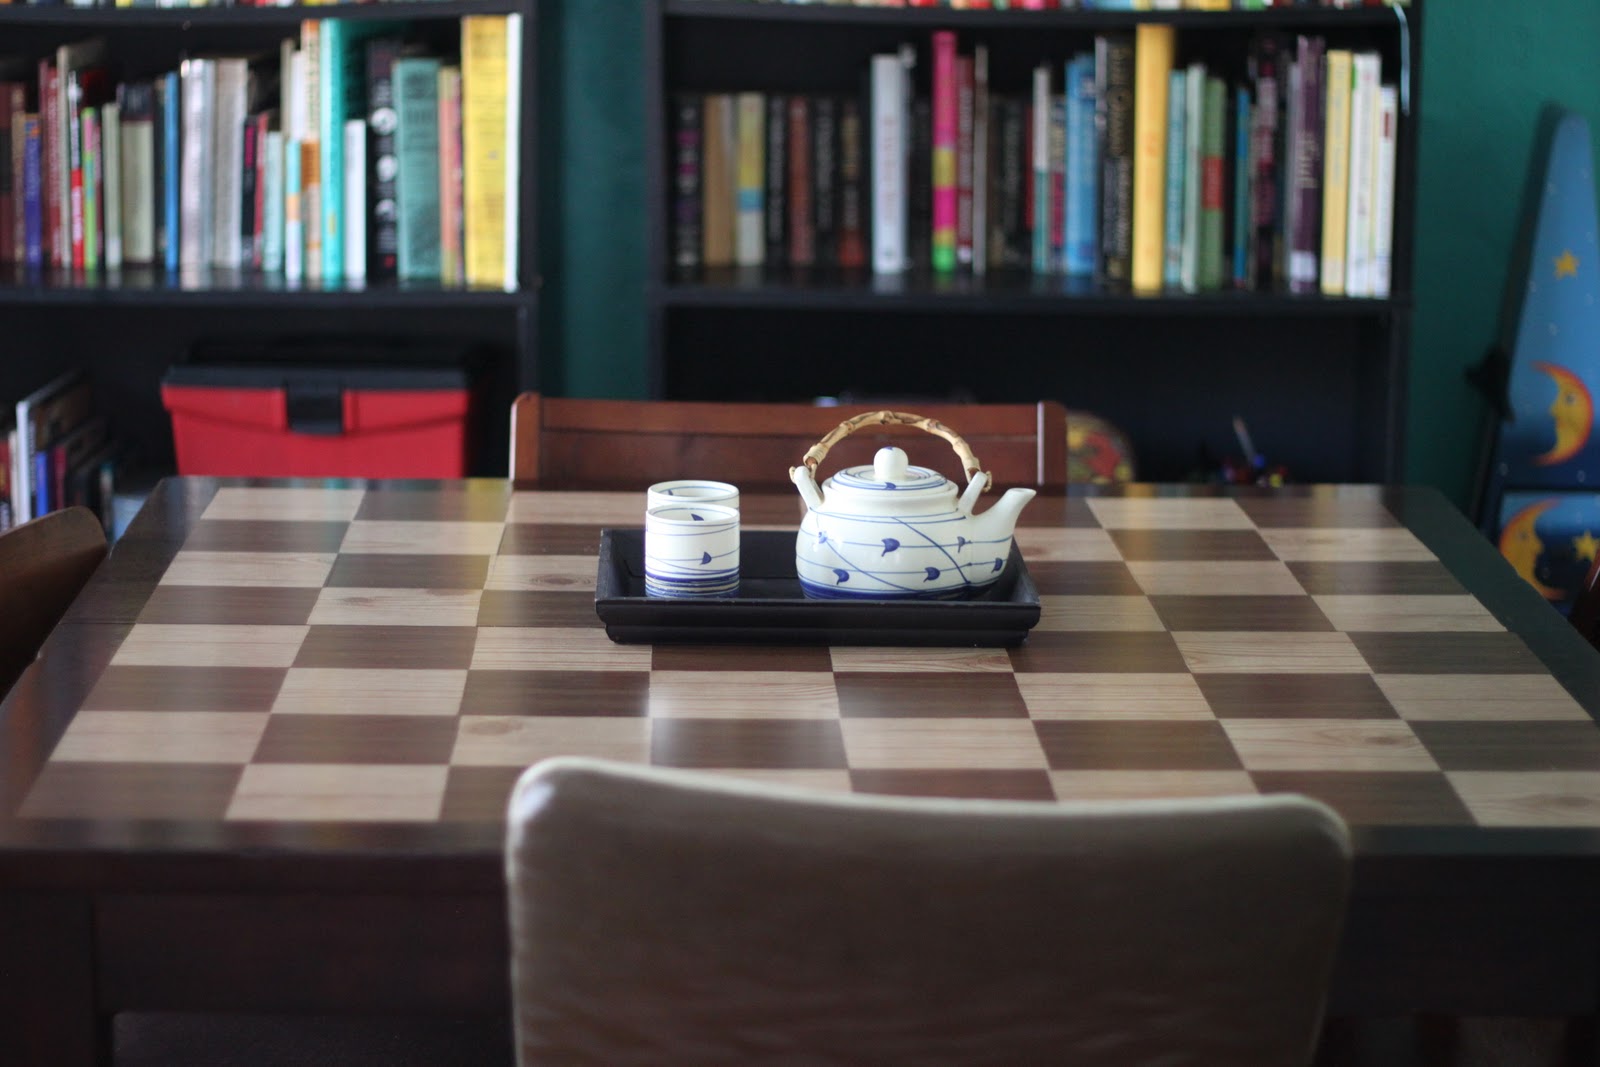 how to build a wooden chess board